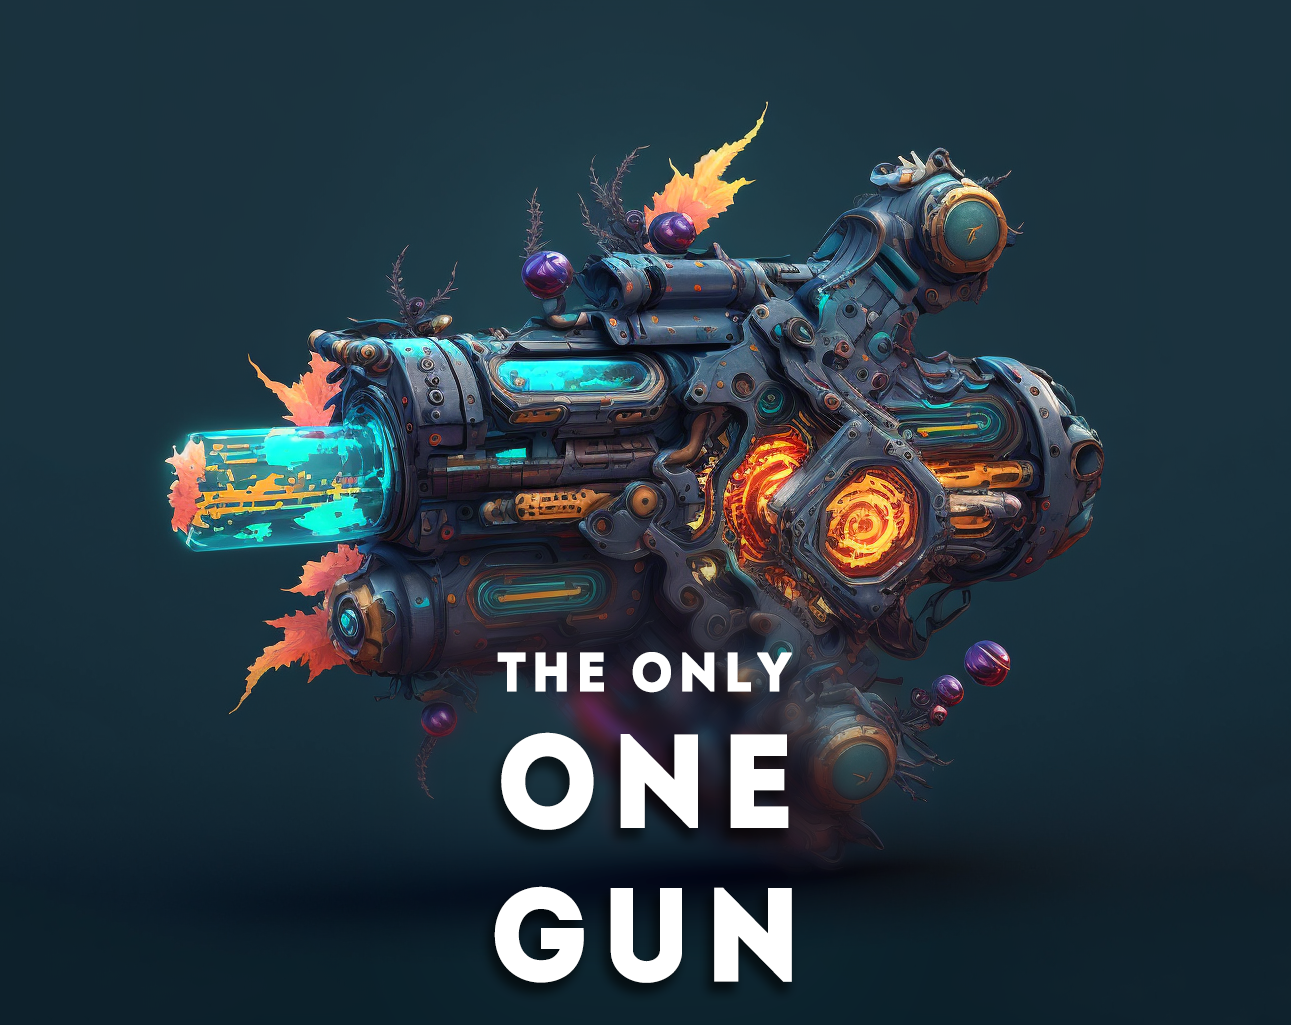 The only ONE GUN